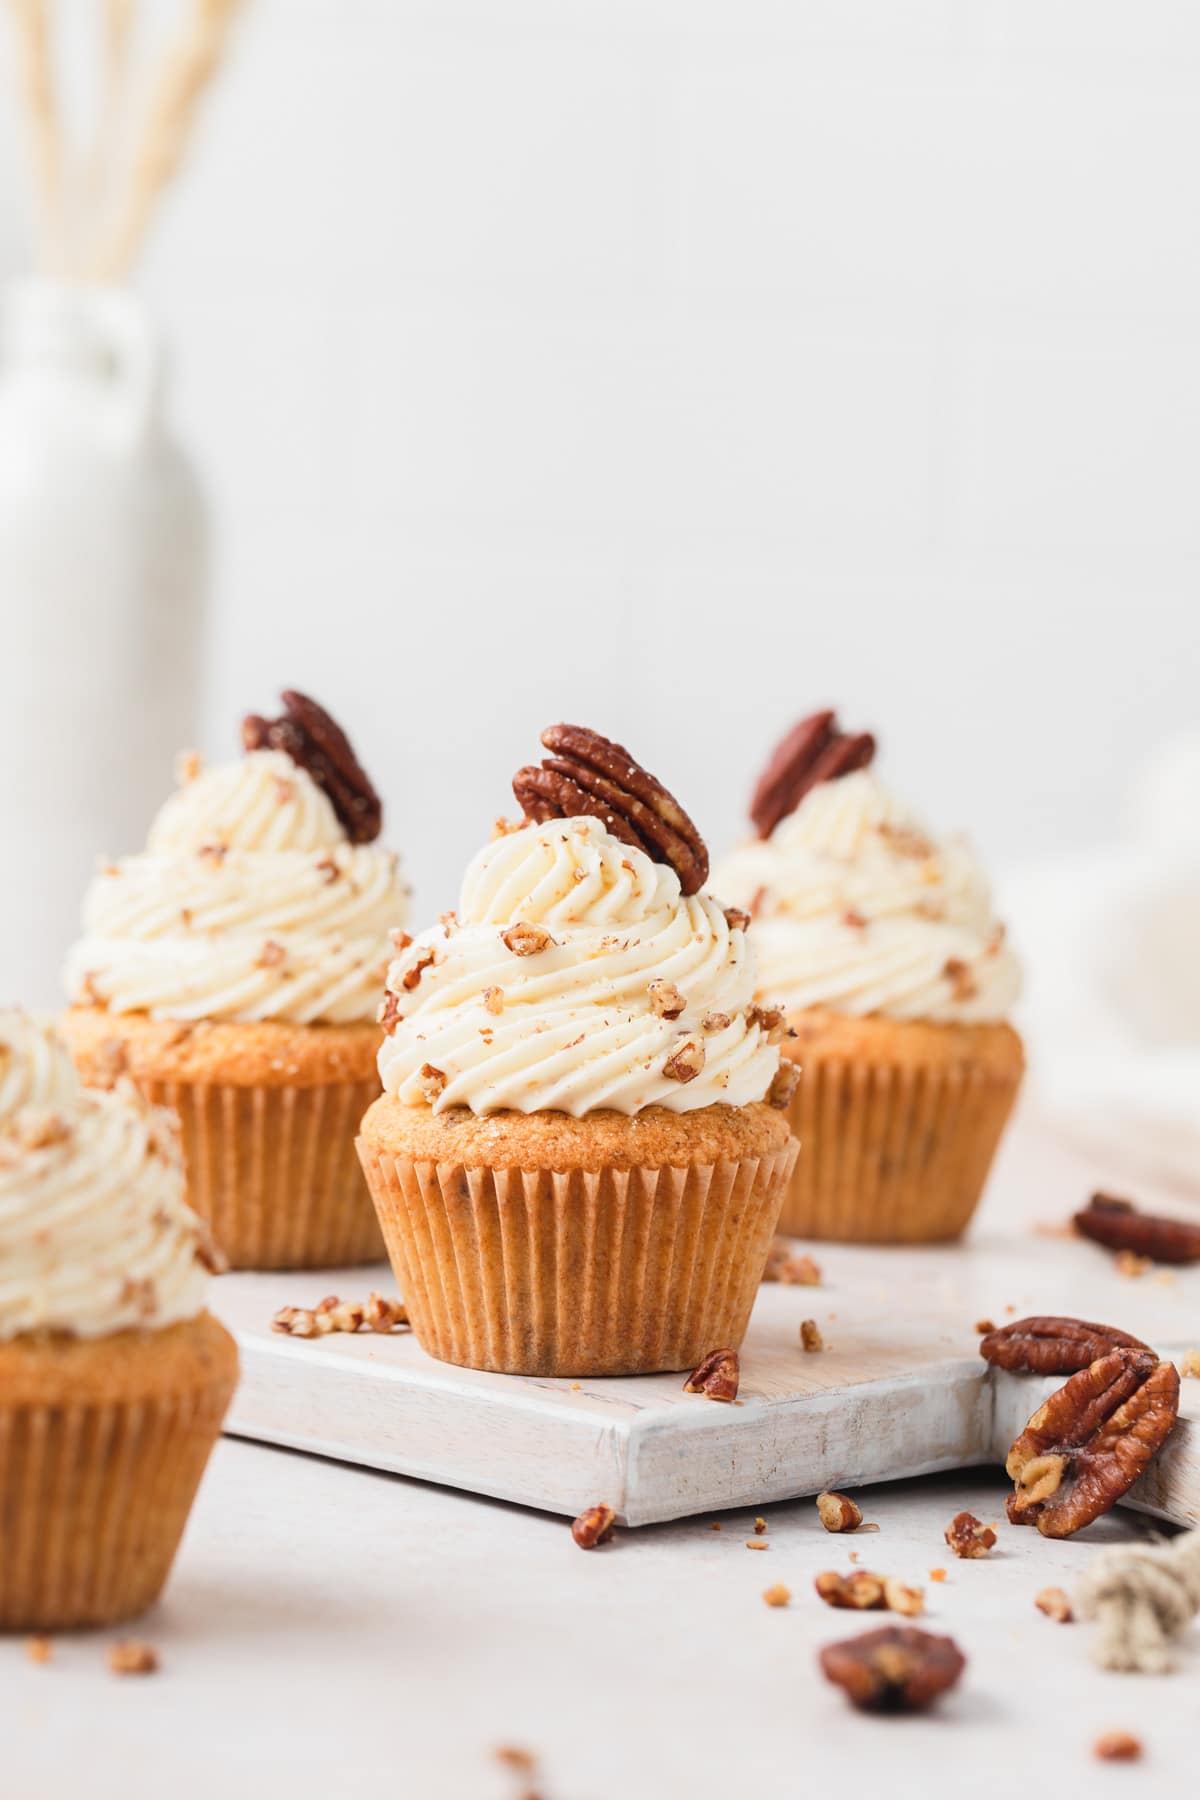 brown butter pecan cupcakes with buttered pecans on top